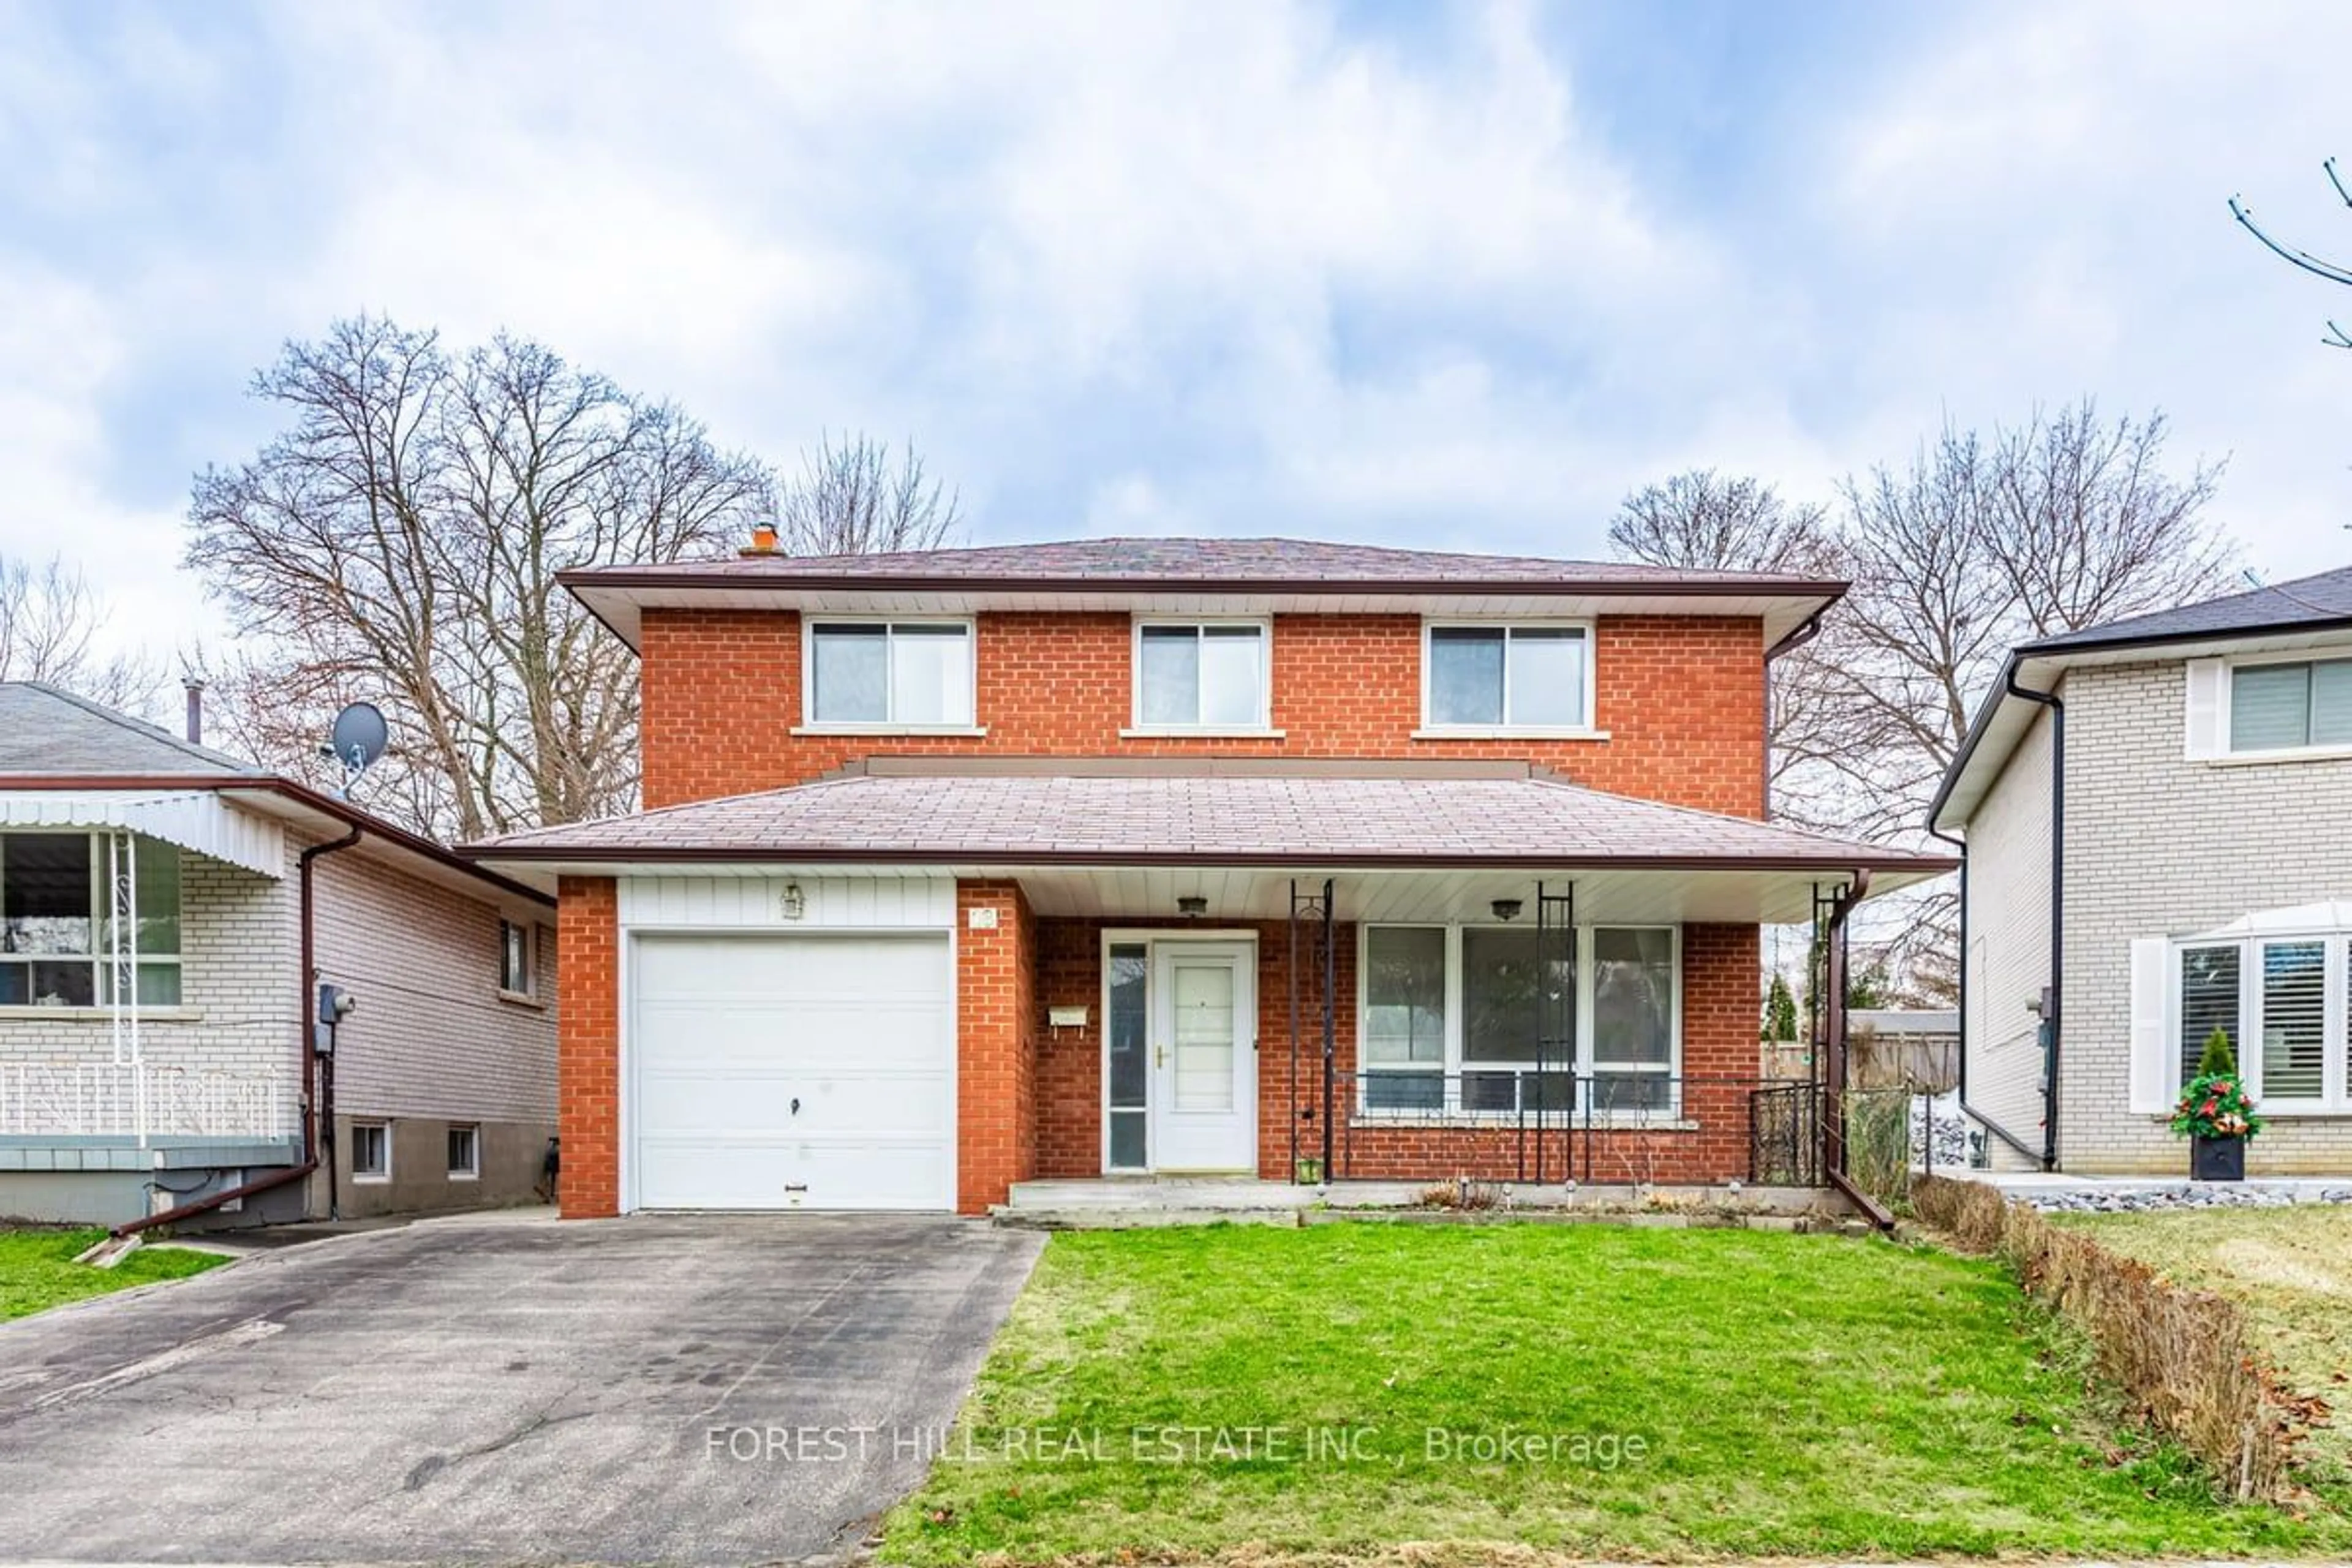 Home with brick exterior material for 18 Munford Cres, Toronto Ontario M4B 1C1